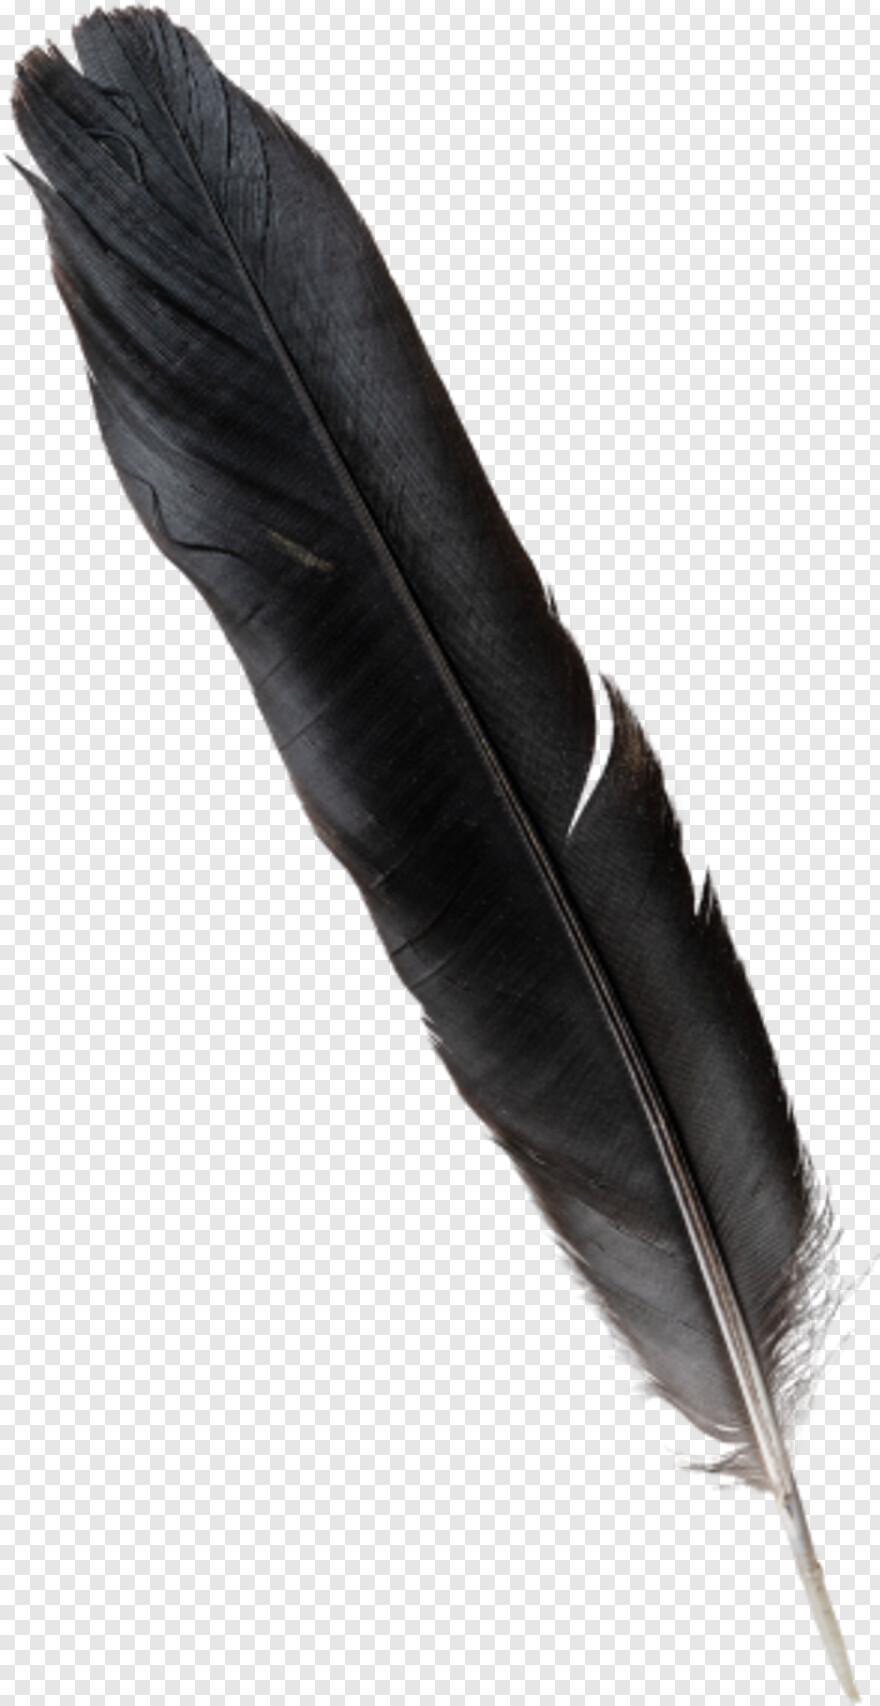 feather # 842399